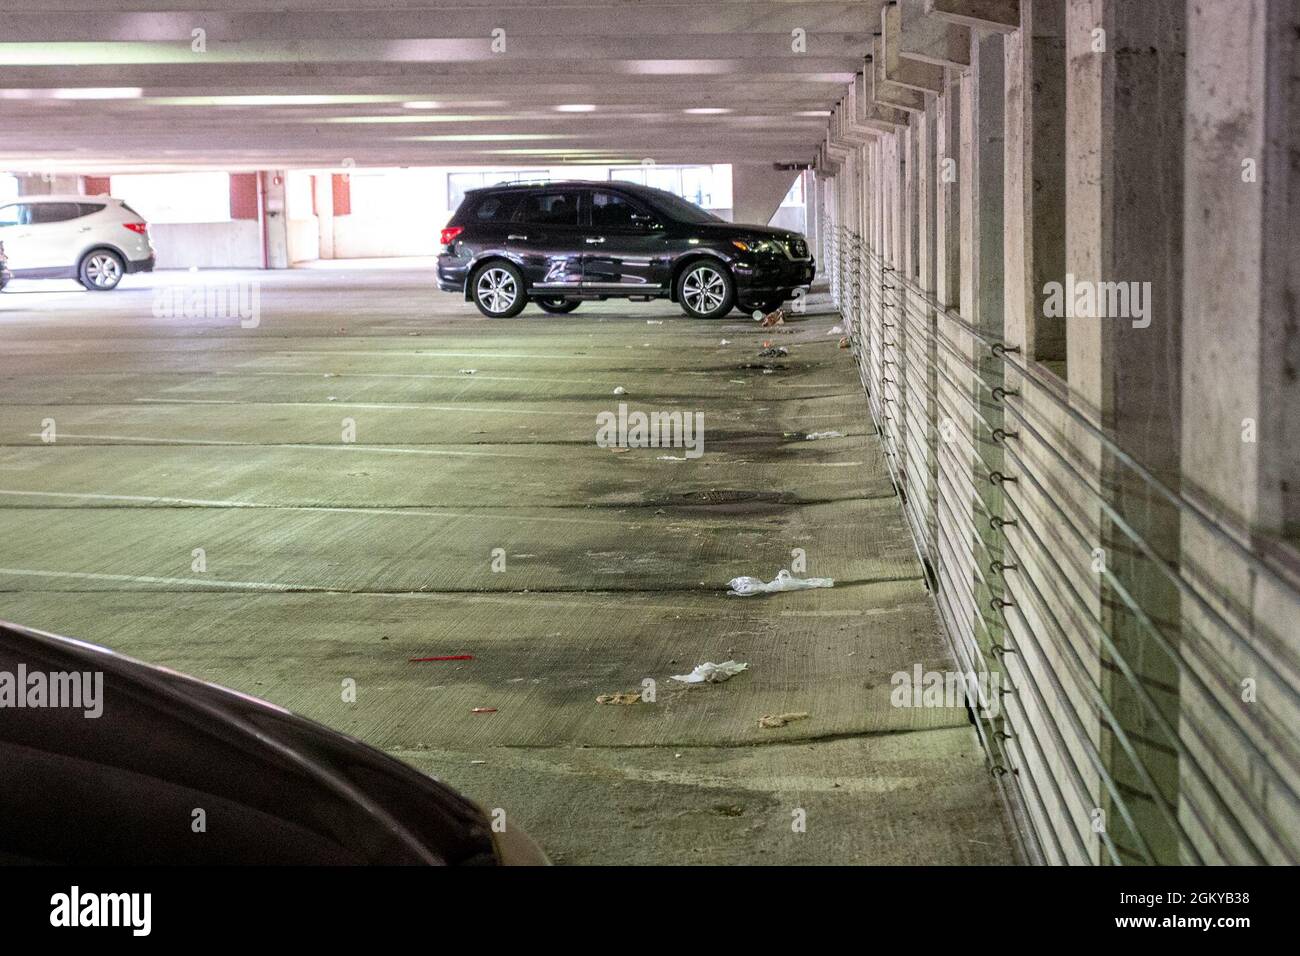 WASHINGTON, DC (July 27, 2021) – Litter covers the pavement of a parking garage onboard Washington Navy Yard prior to a base clean-up event. Stock Photo